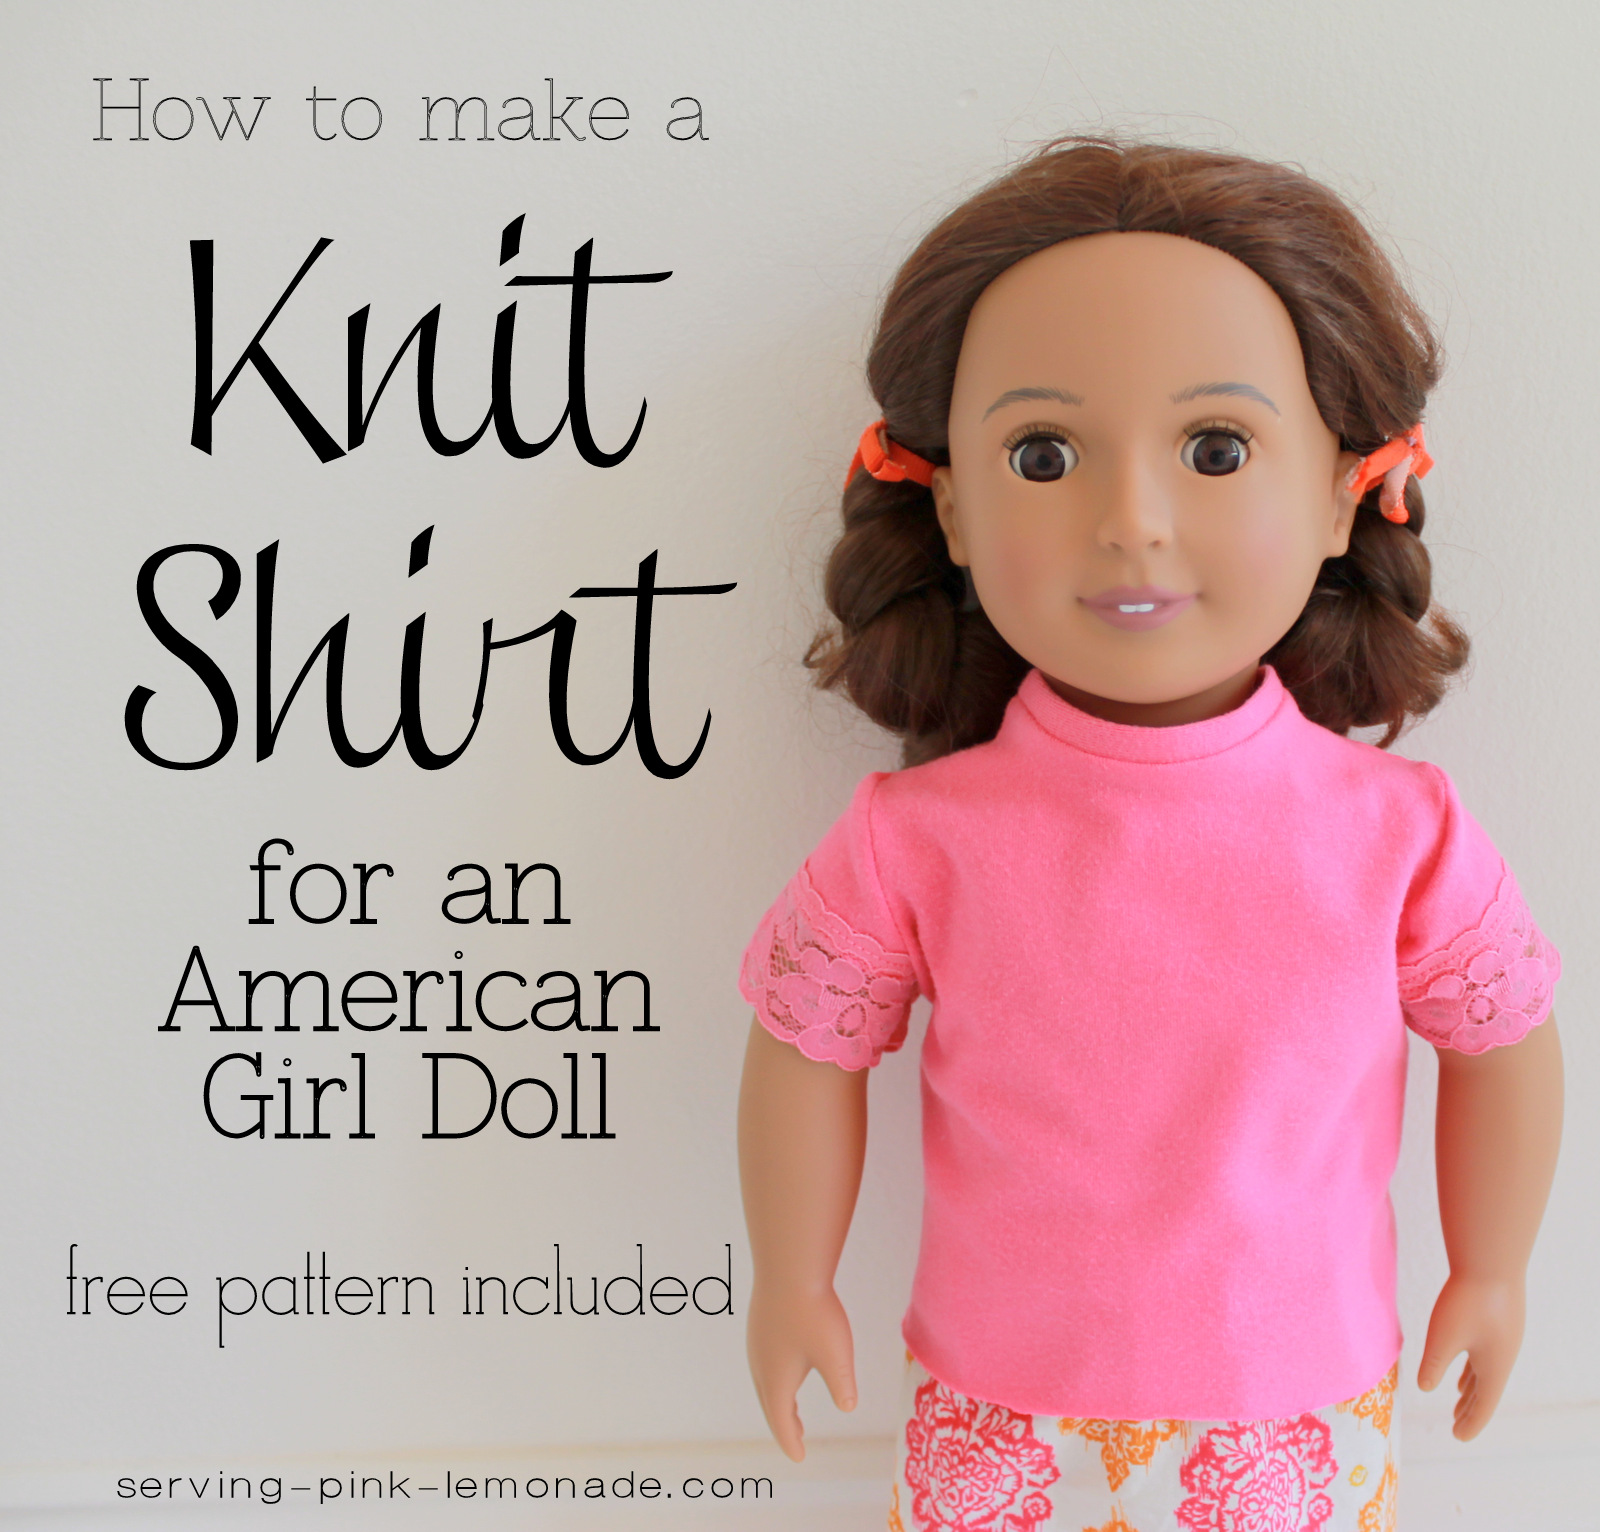 Serving Pink Lemonade: How to Sew a Shirt for an 18 Inch Doll - Free  Pattern Included